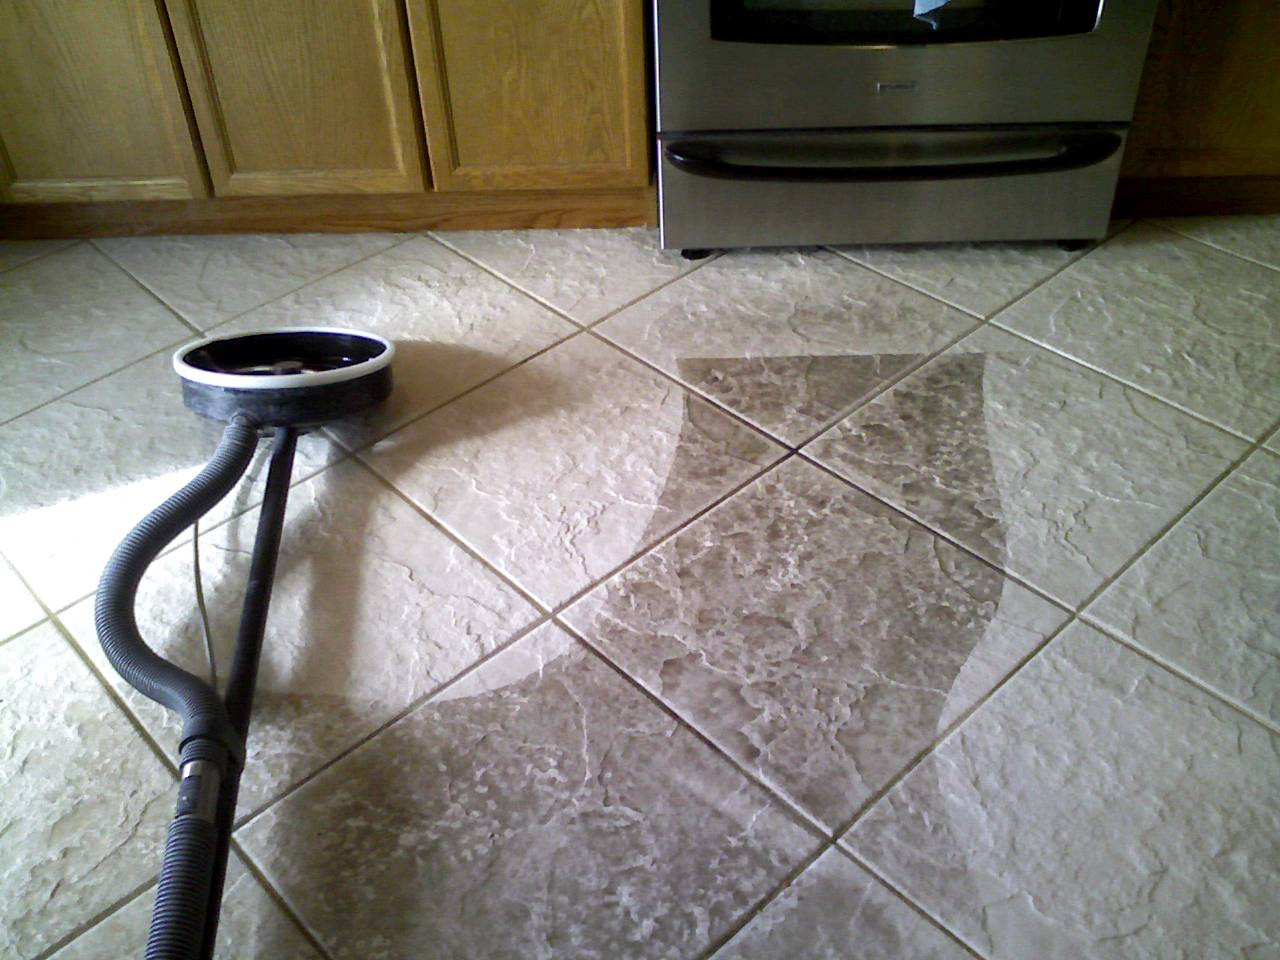 Kitchen Tile Cleaners Inspirational Dirty Kitchen Tile and Grout Hire A Professional Tile and